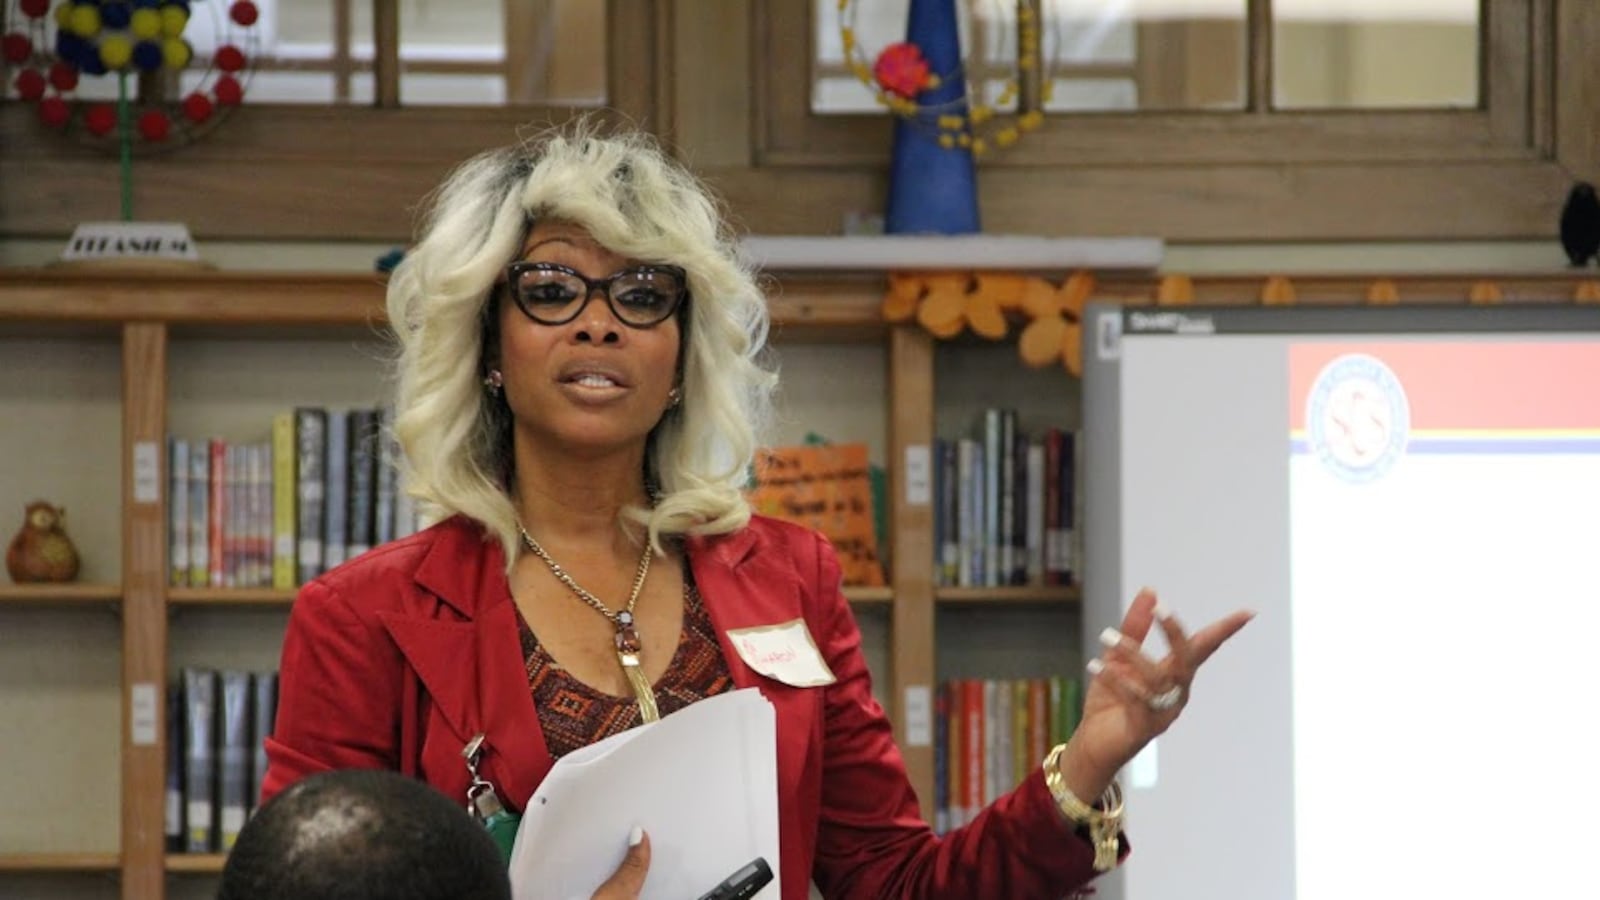 Sharon Griffin started her tenure as the Achievement School District’s chief last June. She announced this month that she's leaving.